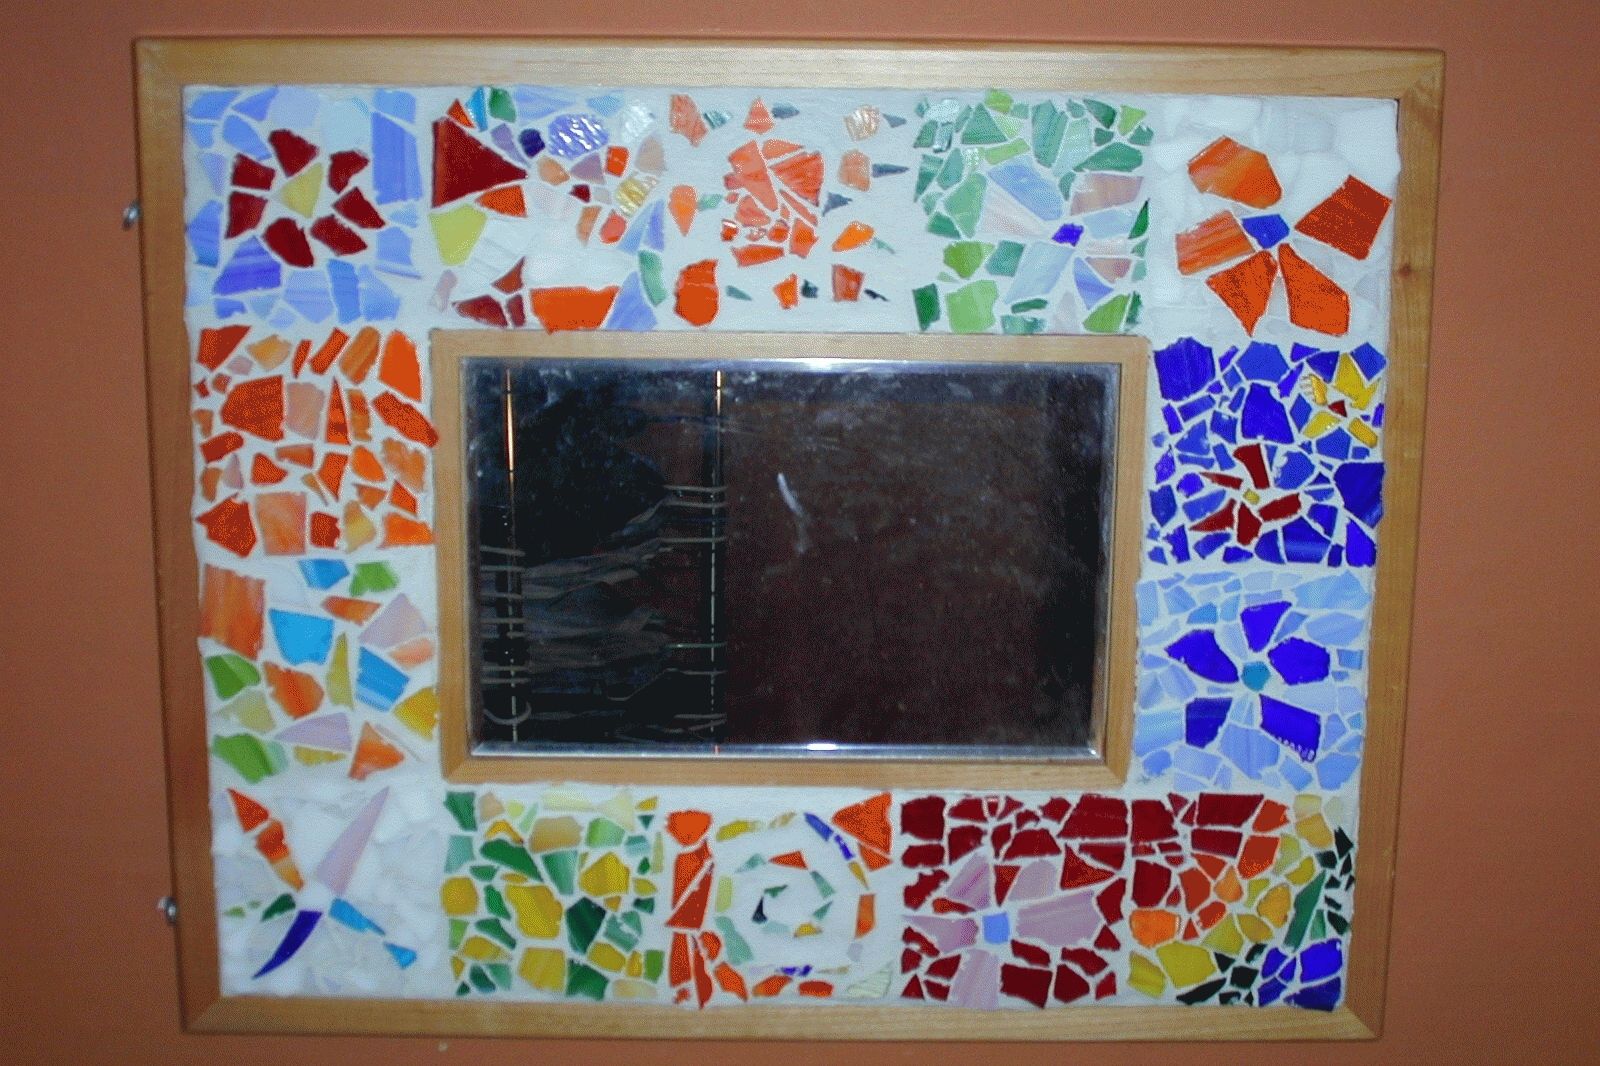 Frame Mosaic Tile Mirror Instructions With Most Recently Released Mosaic Art Kits For Adults (View 6 of 20)